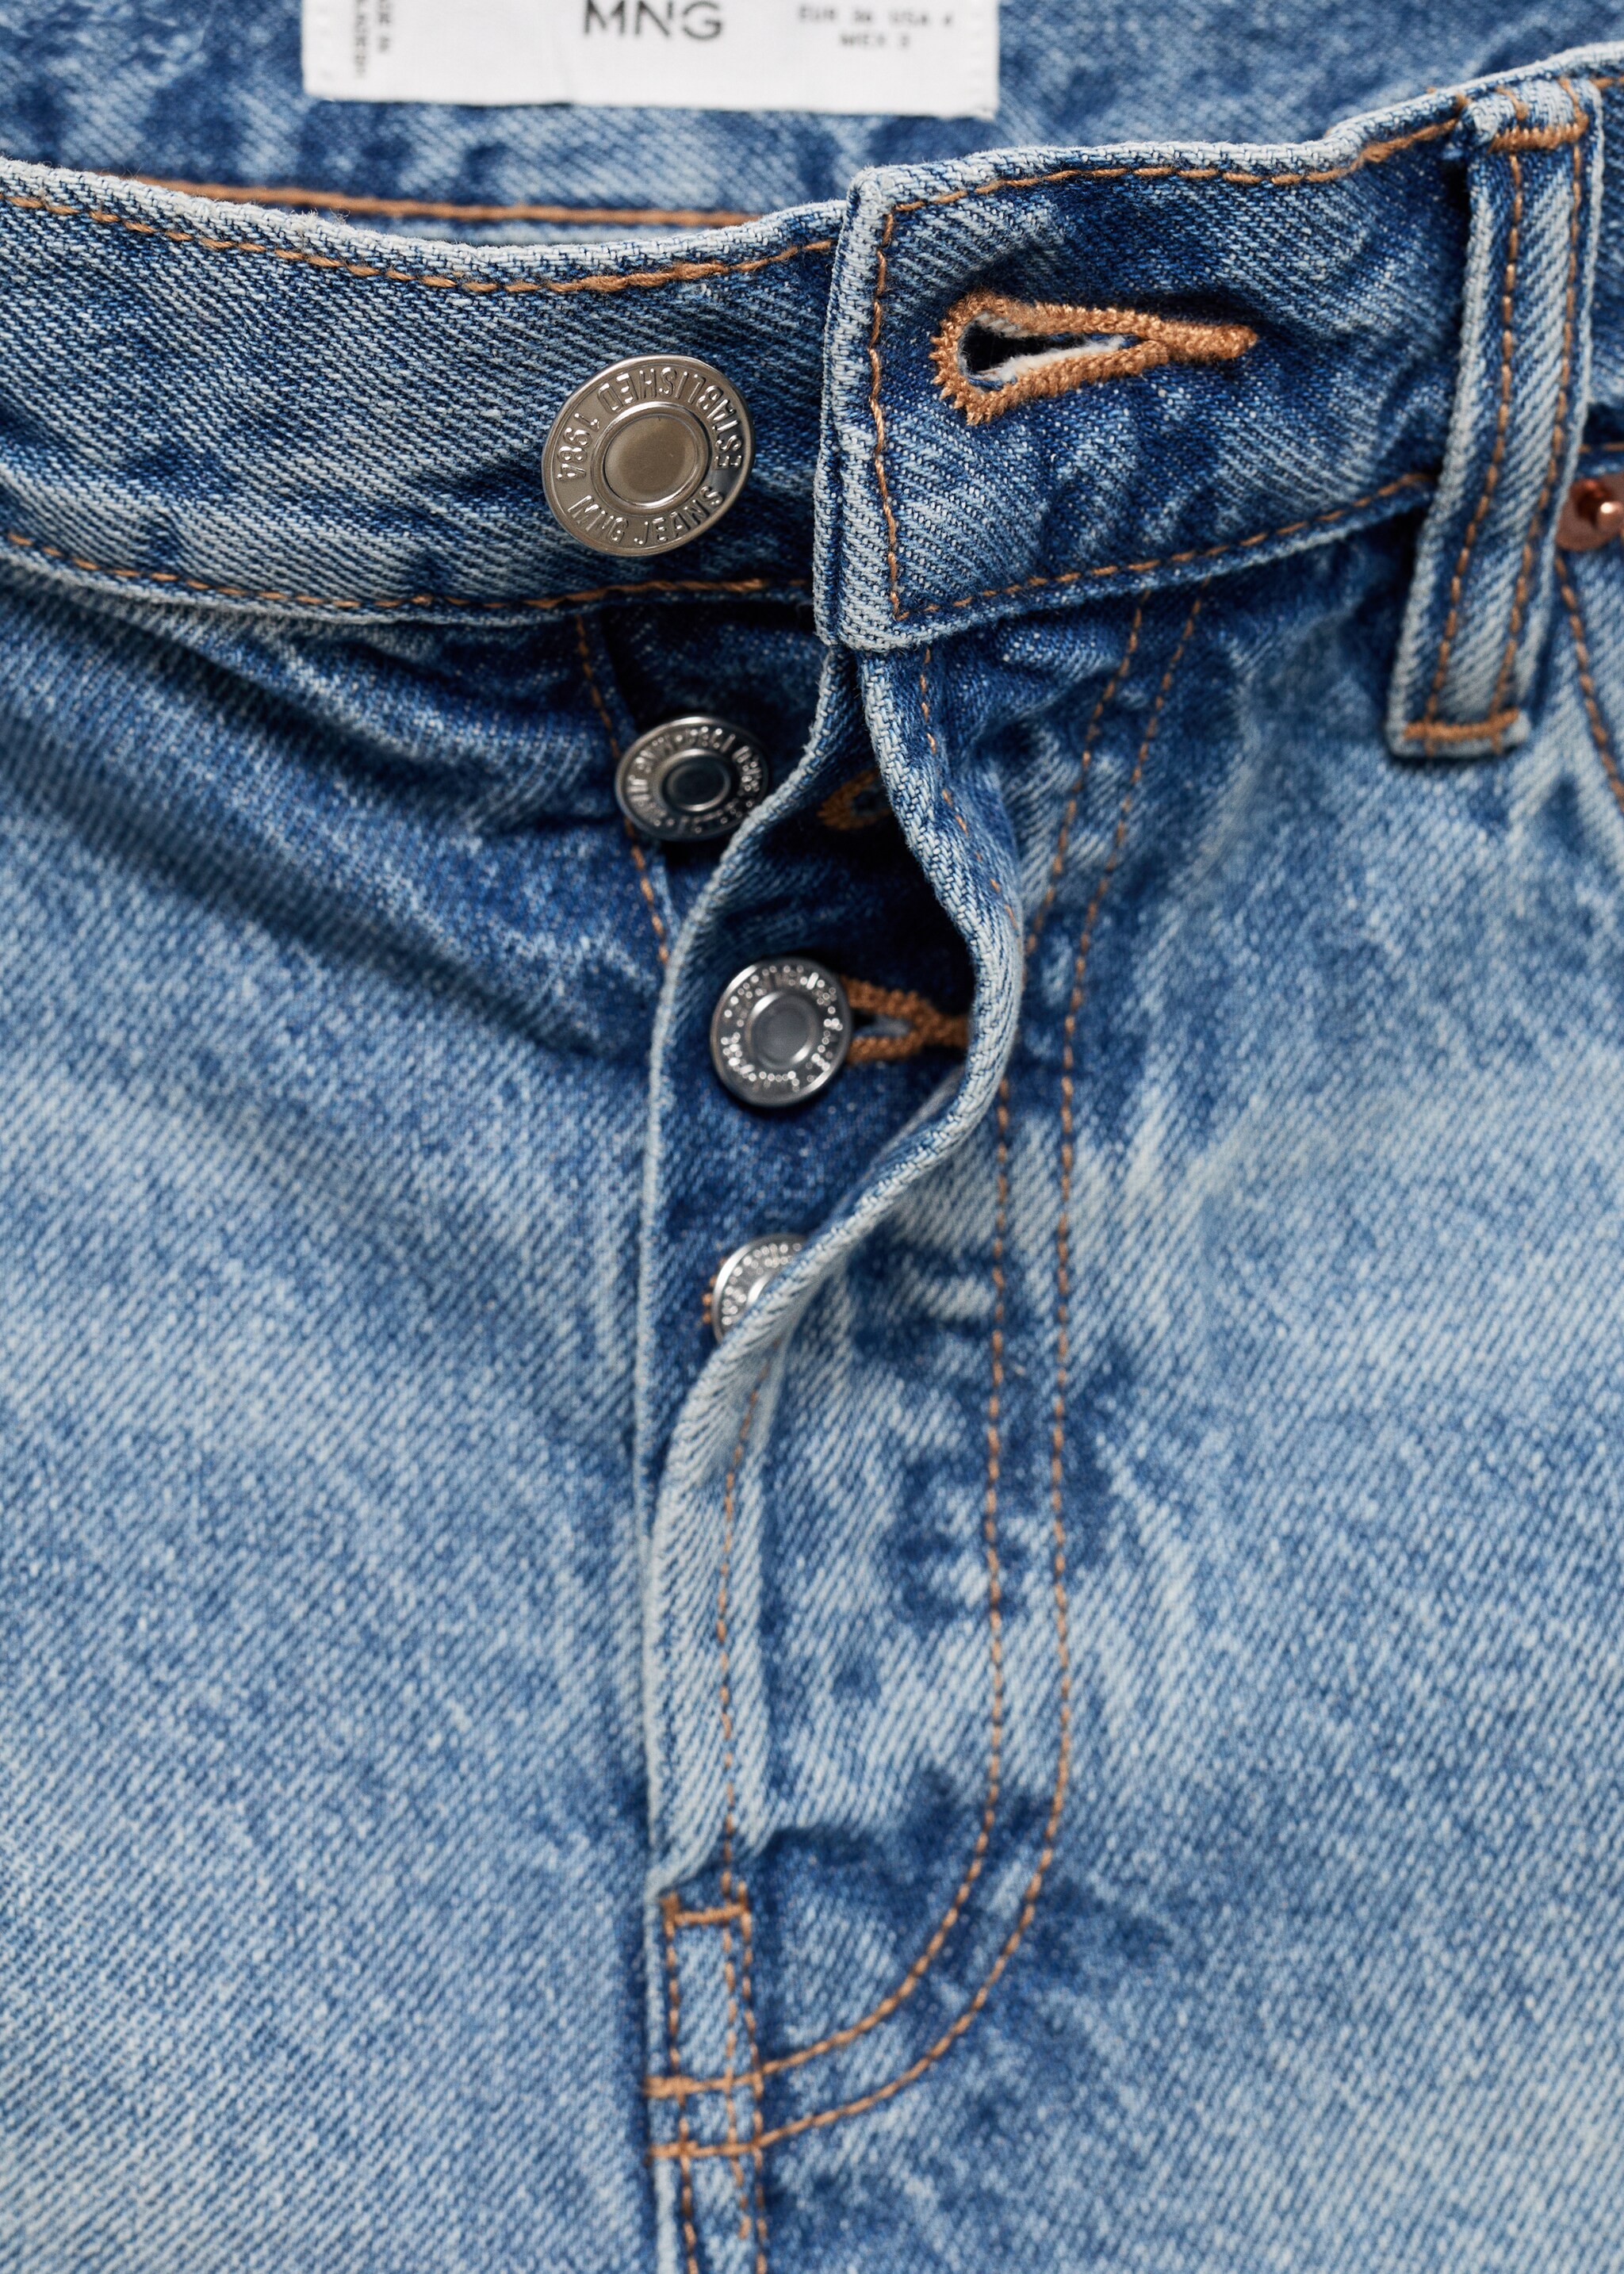 Denim shorts with frayed hem - Details of the article 0